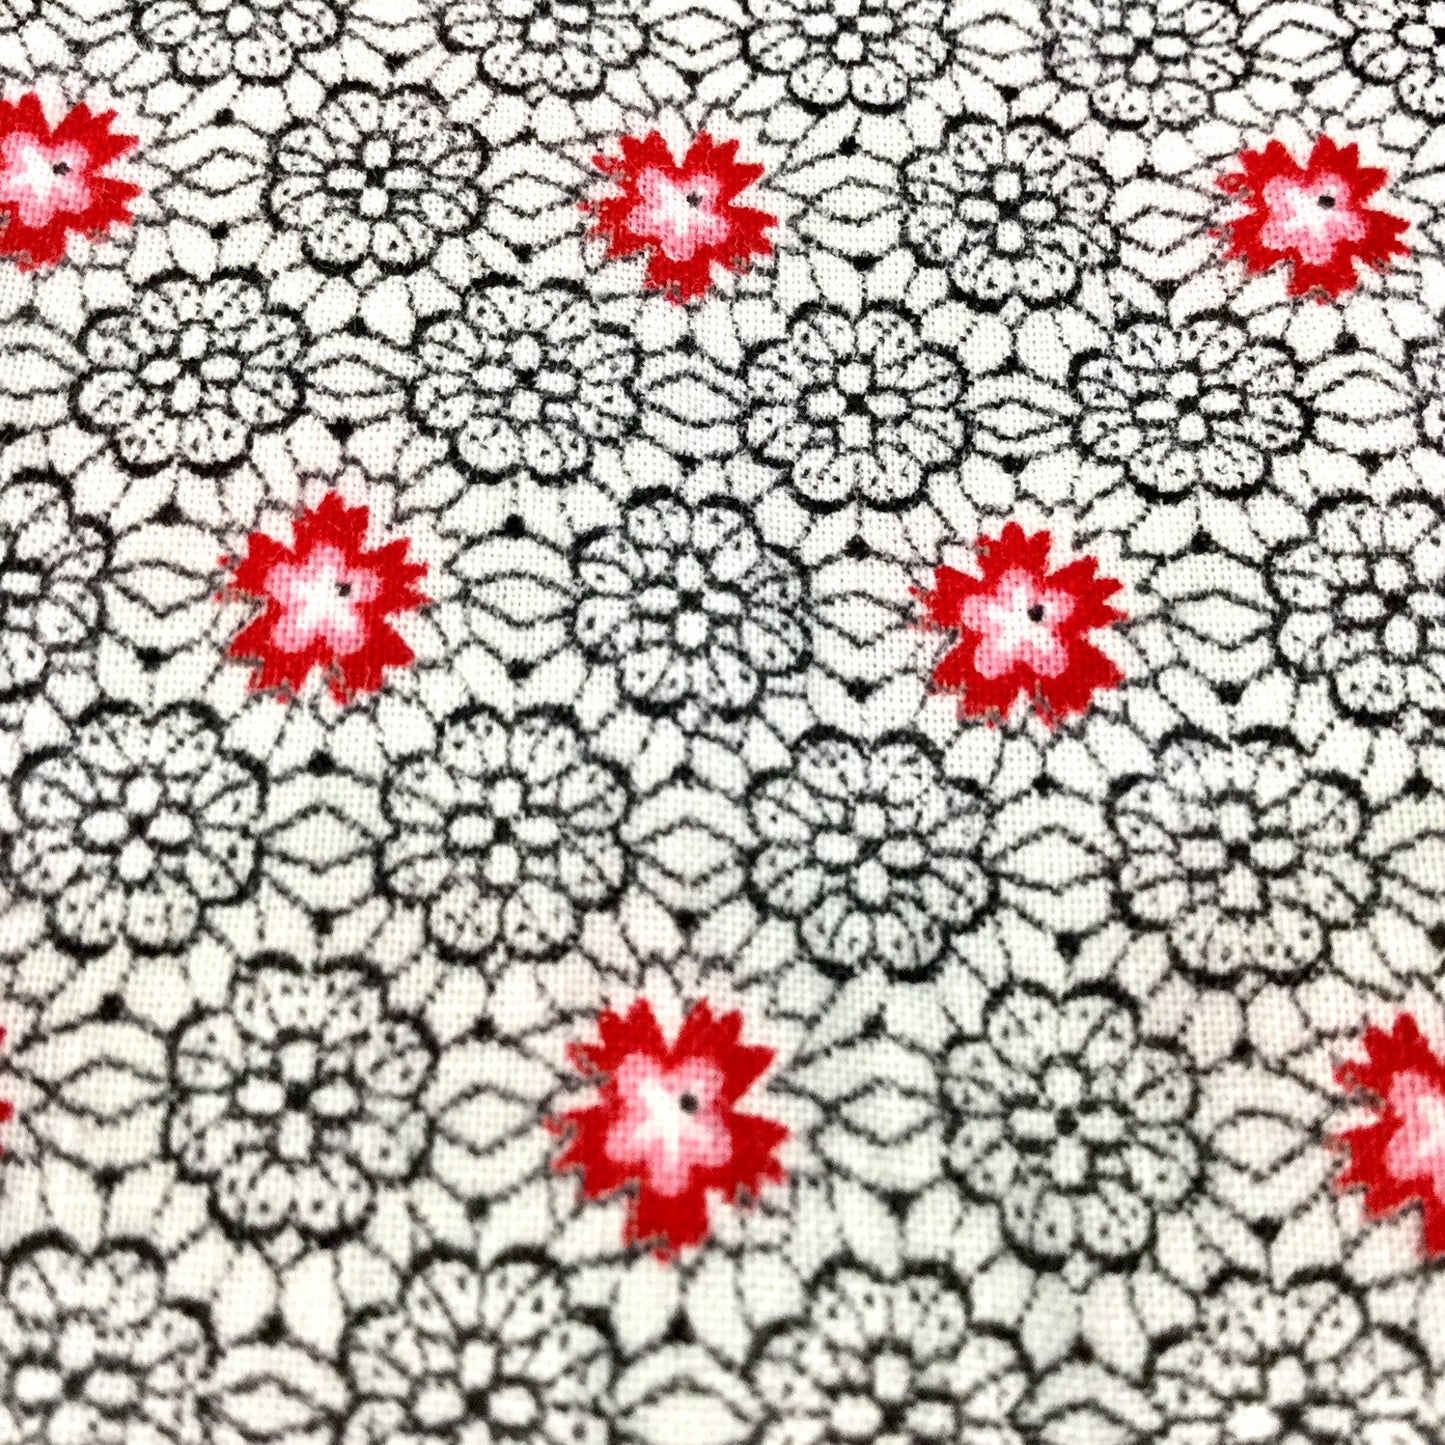 1950s Red Floral Cotton Fabric, Vintage Red Black White Floral Print, Sold as a Whole, 8Y 30", W34", Fine Percale, Quilting Fabric